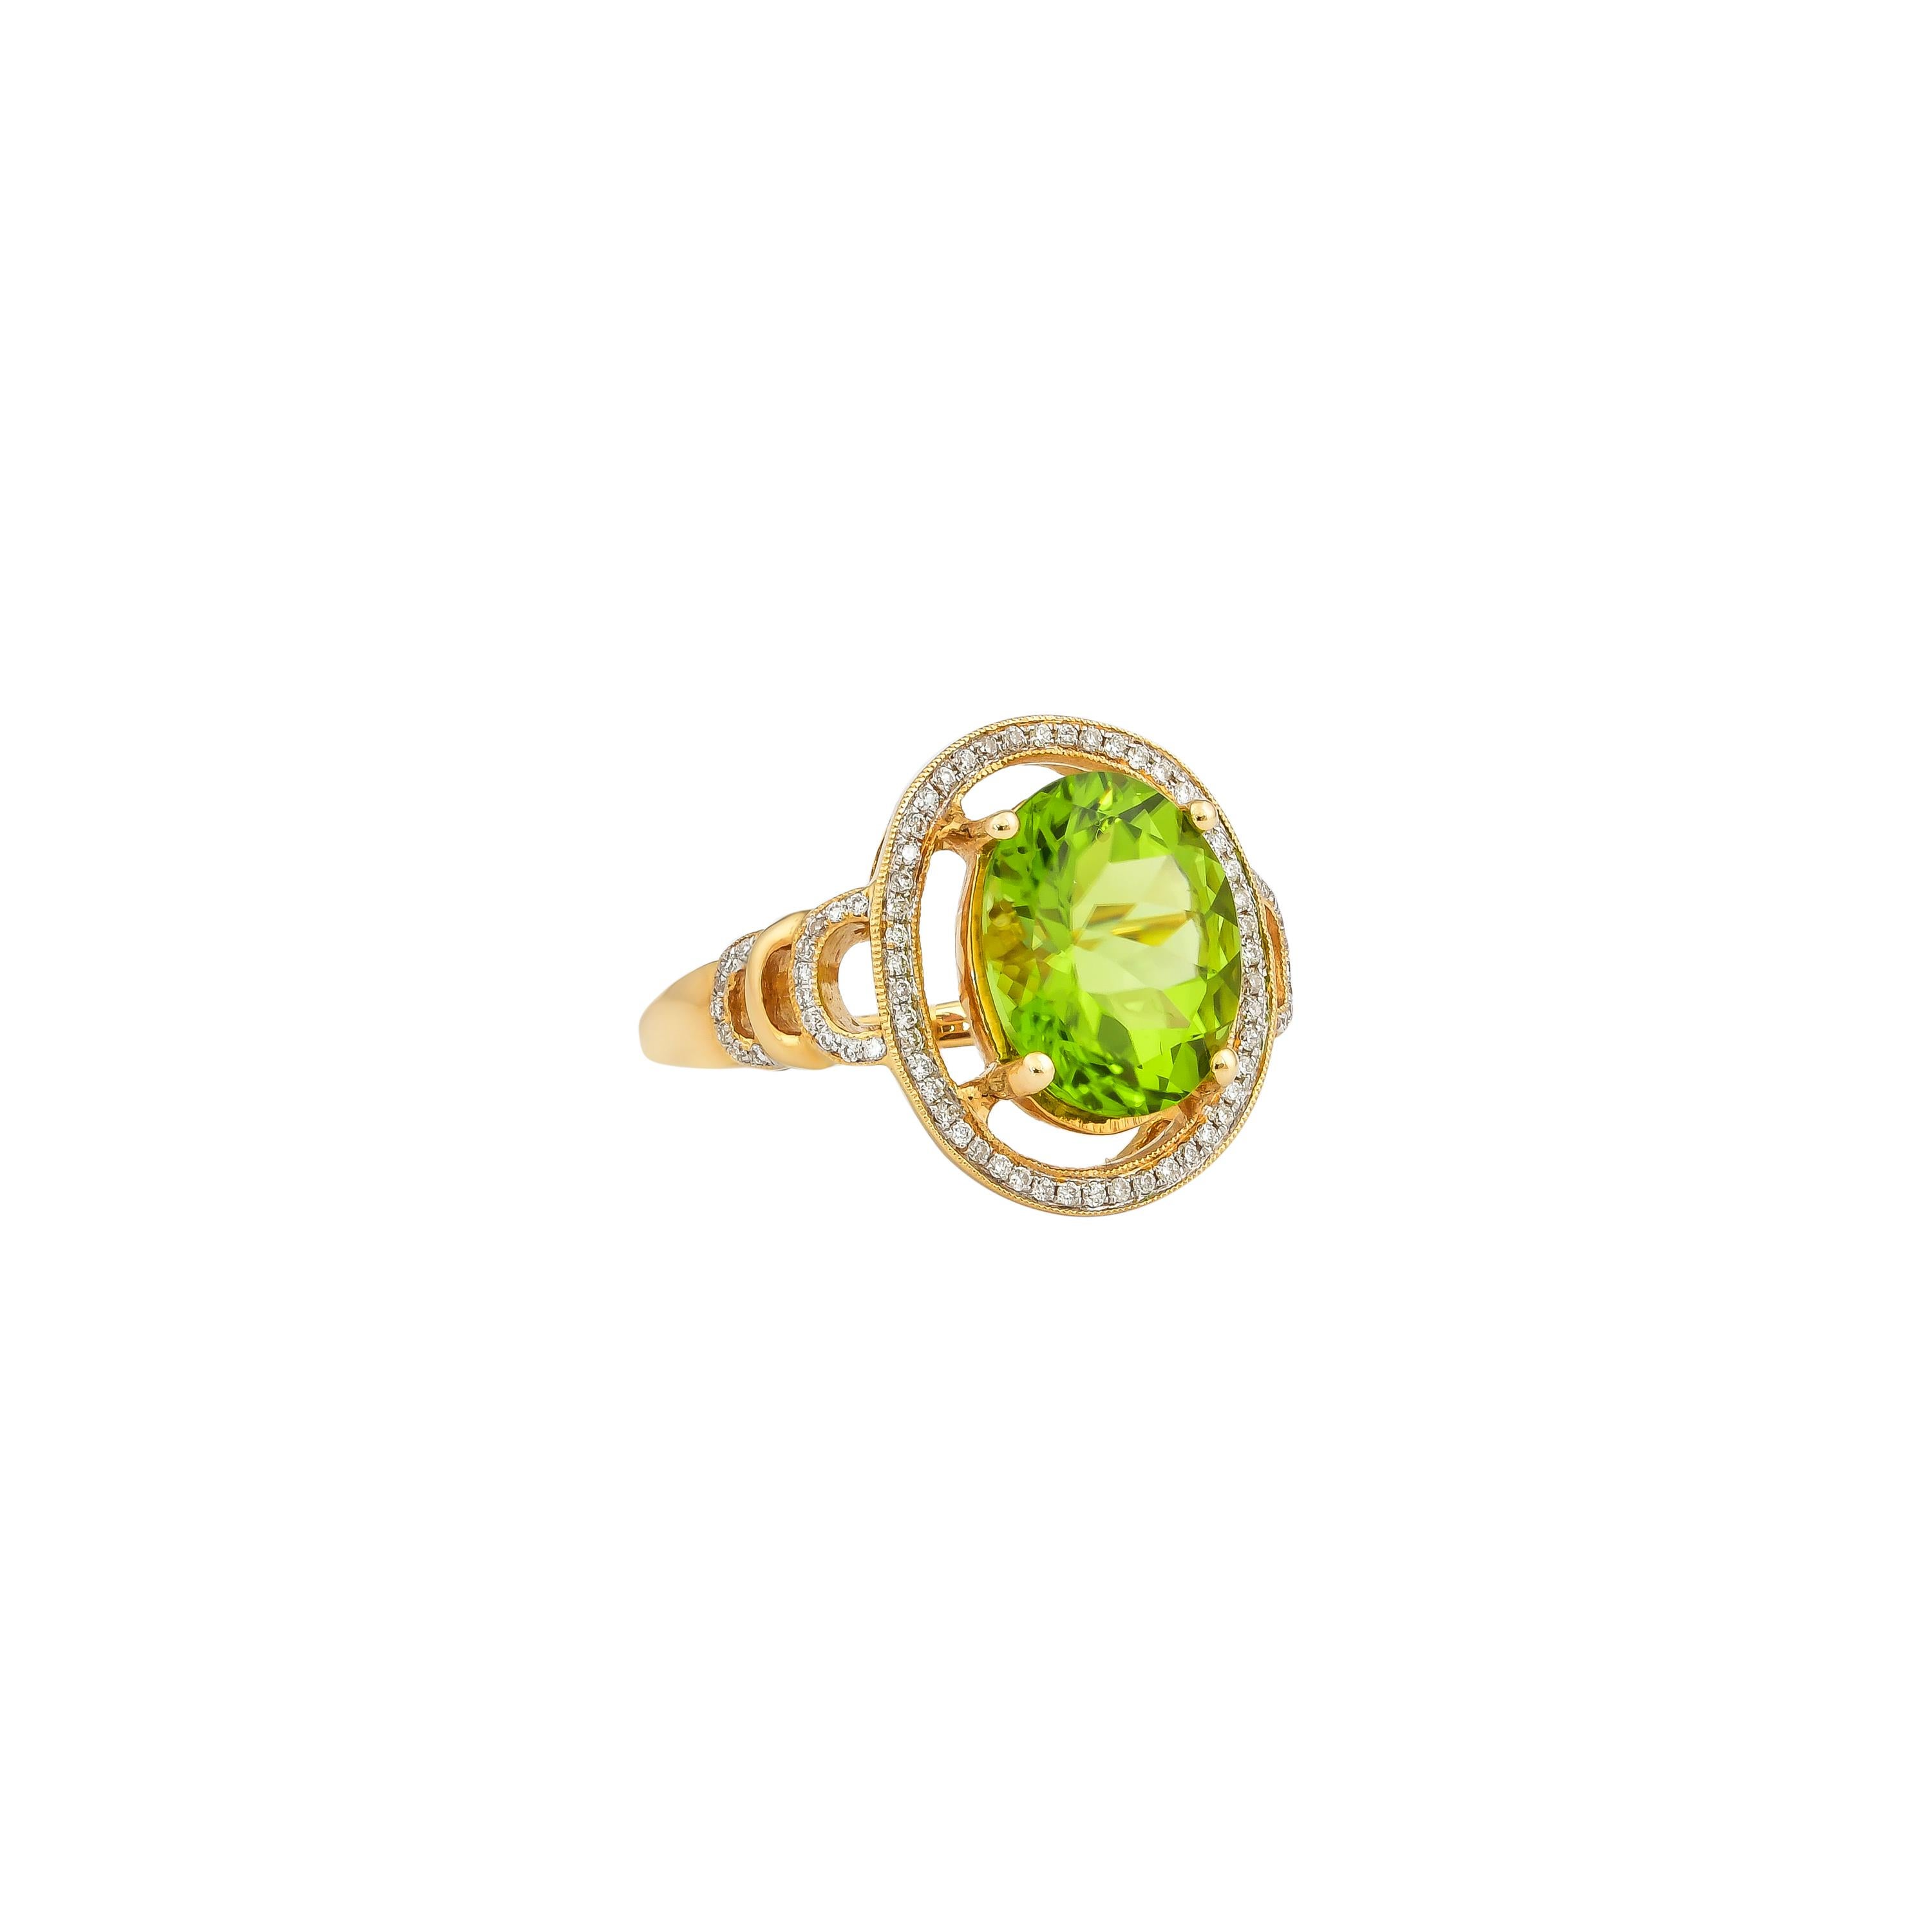 This collection features an array of pretty peridot rings! Accented with diamonds these rings are made in yellow gold and present a vibrant and fresh look. 

Classic peridot ring in 18K yellow gold with diamonds. 

Peridot: 4.76 carat oval